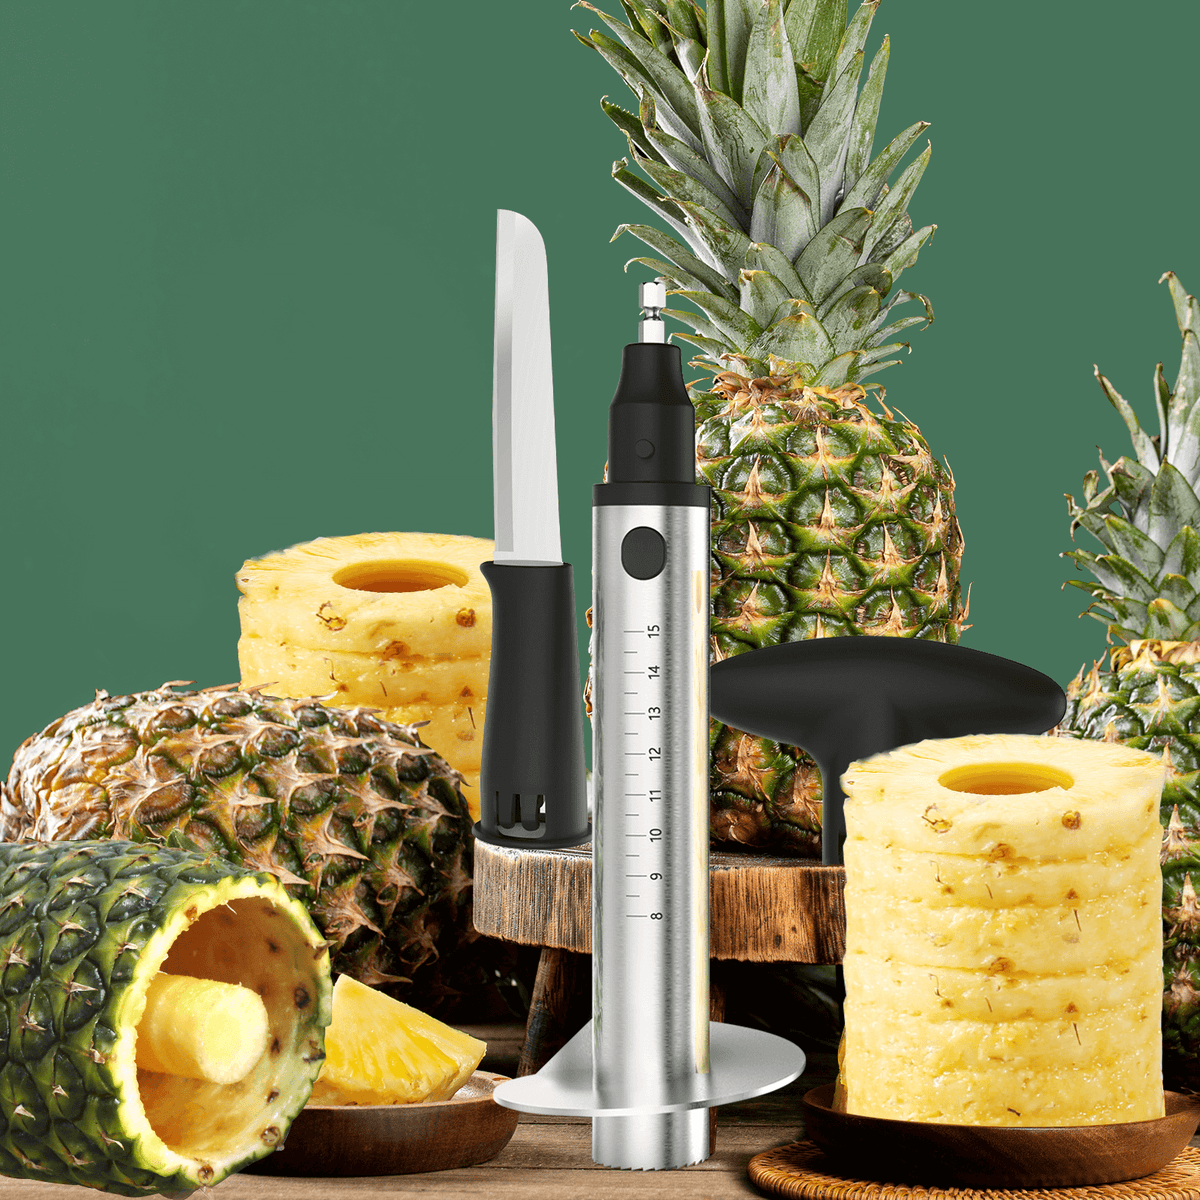 Newness Pineapple Corer with Knife, [Upgraded, Electric & Manual]